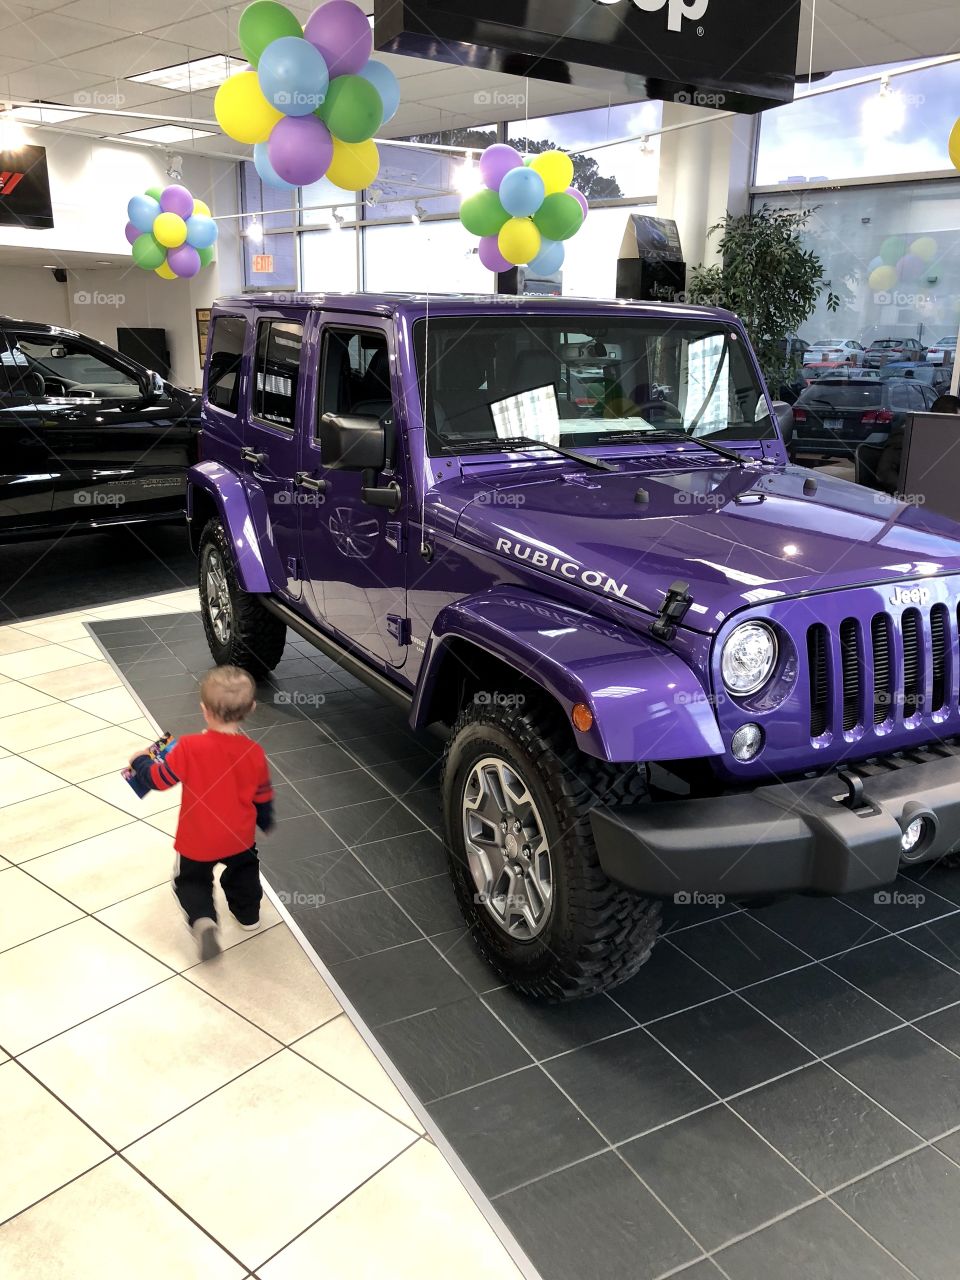 Toddler and purple Jeep 